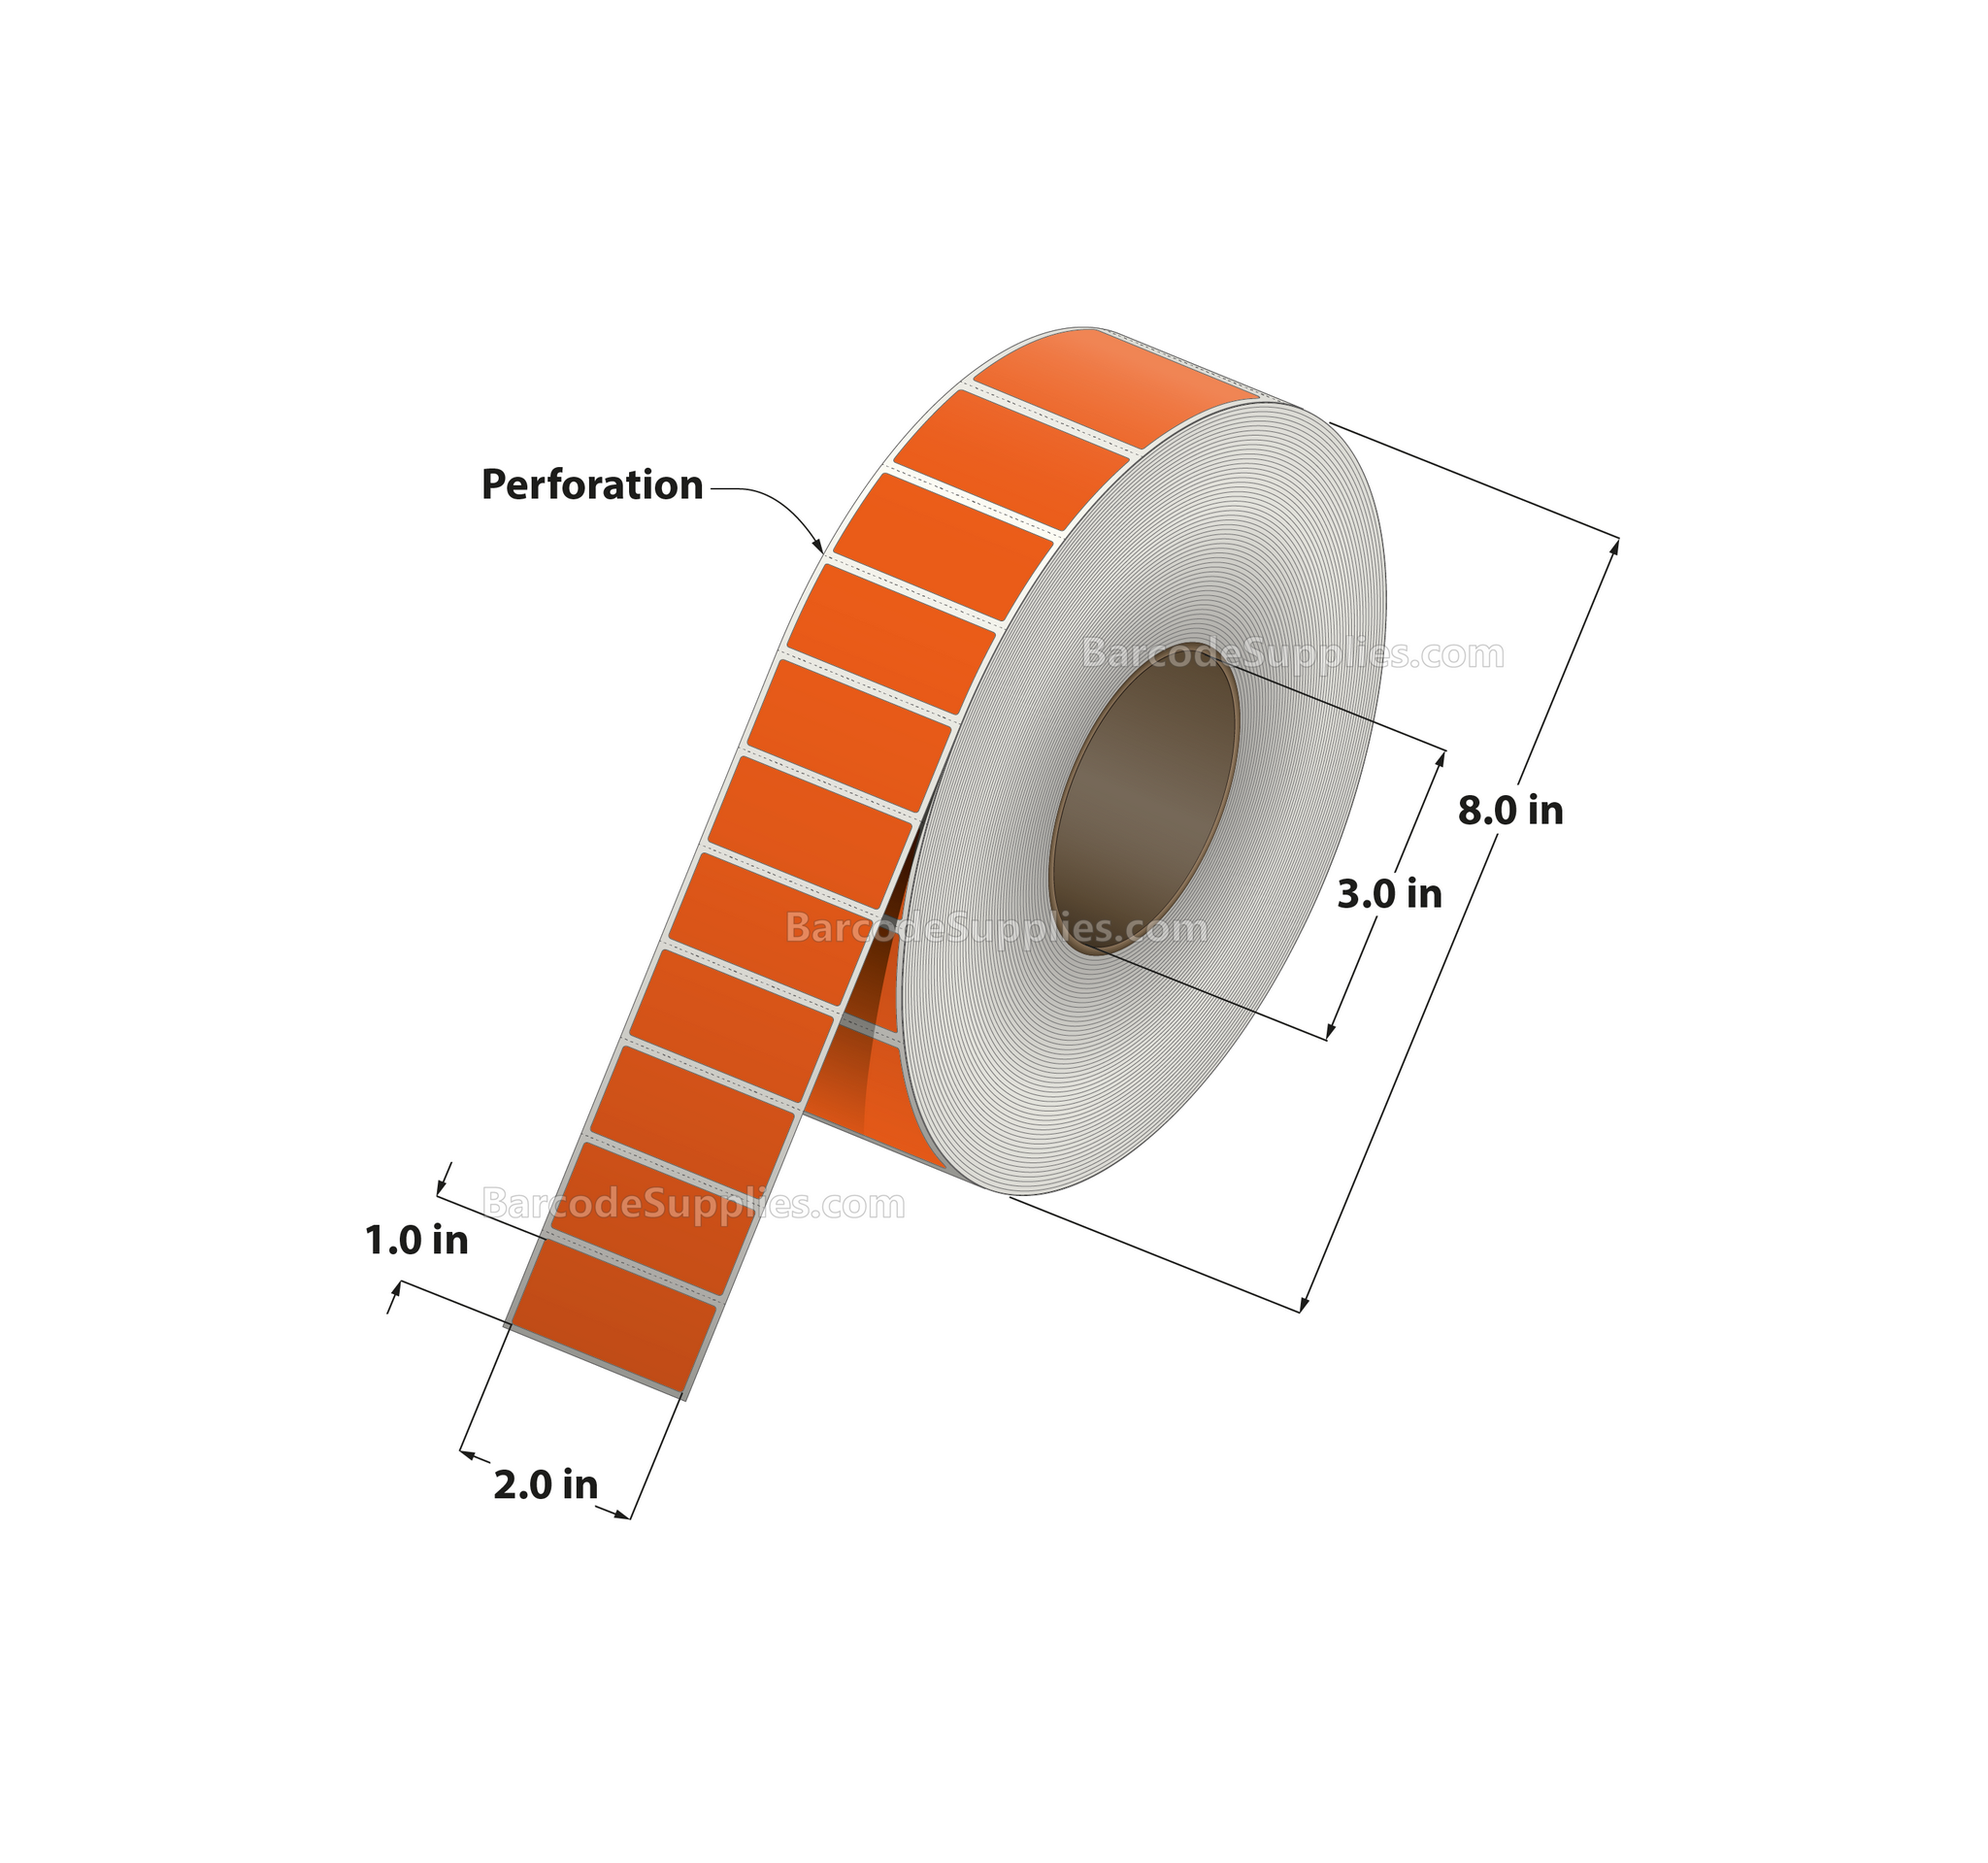 2 x 1 Thermal Transfer 1495 Orange Labels With Permanent Adhesive - Perforated - 5500 Labels Per Roll - Carton Of 8 Rolls - 44000 Labels Total - MPN: RFC-2-1-5500-OR